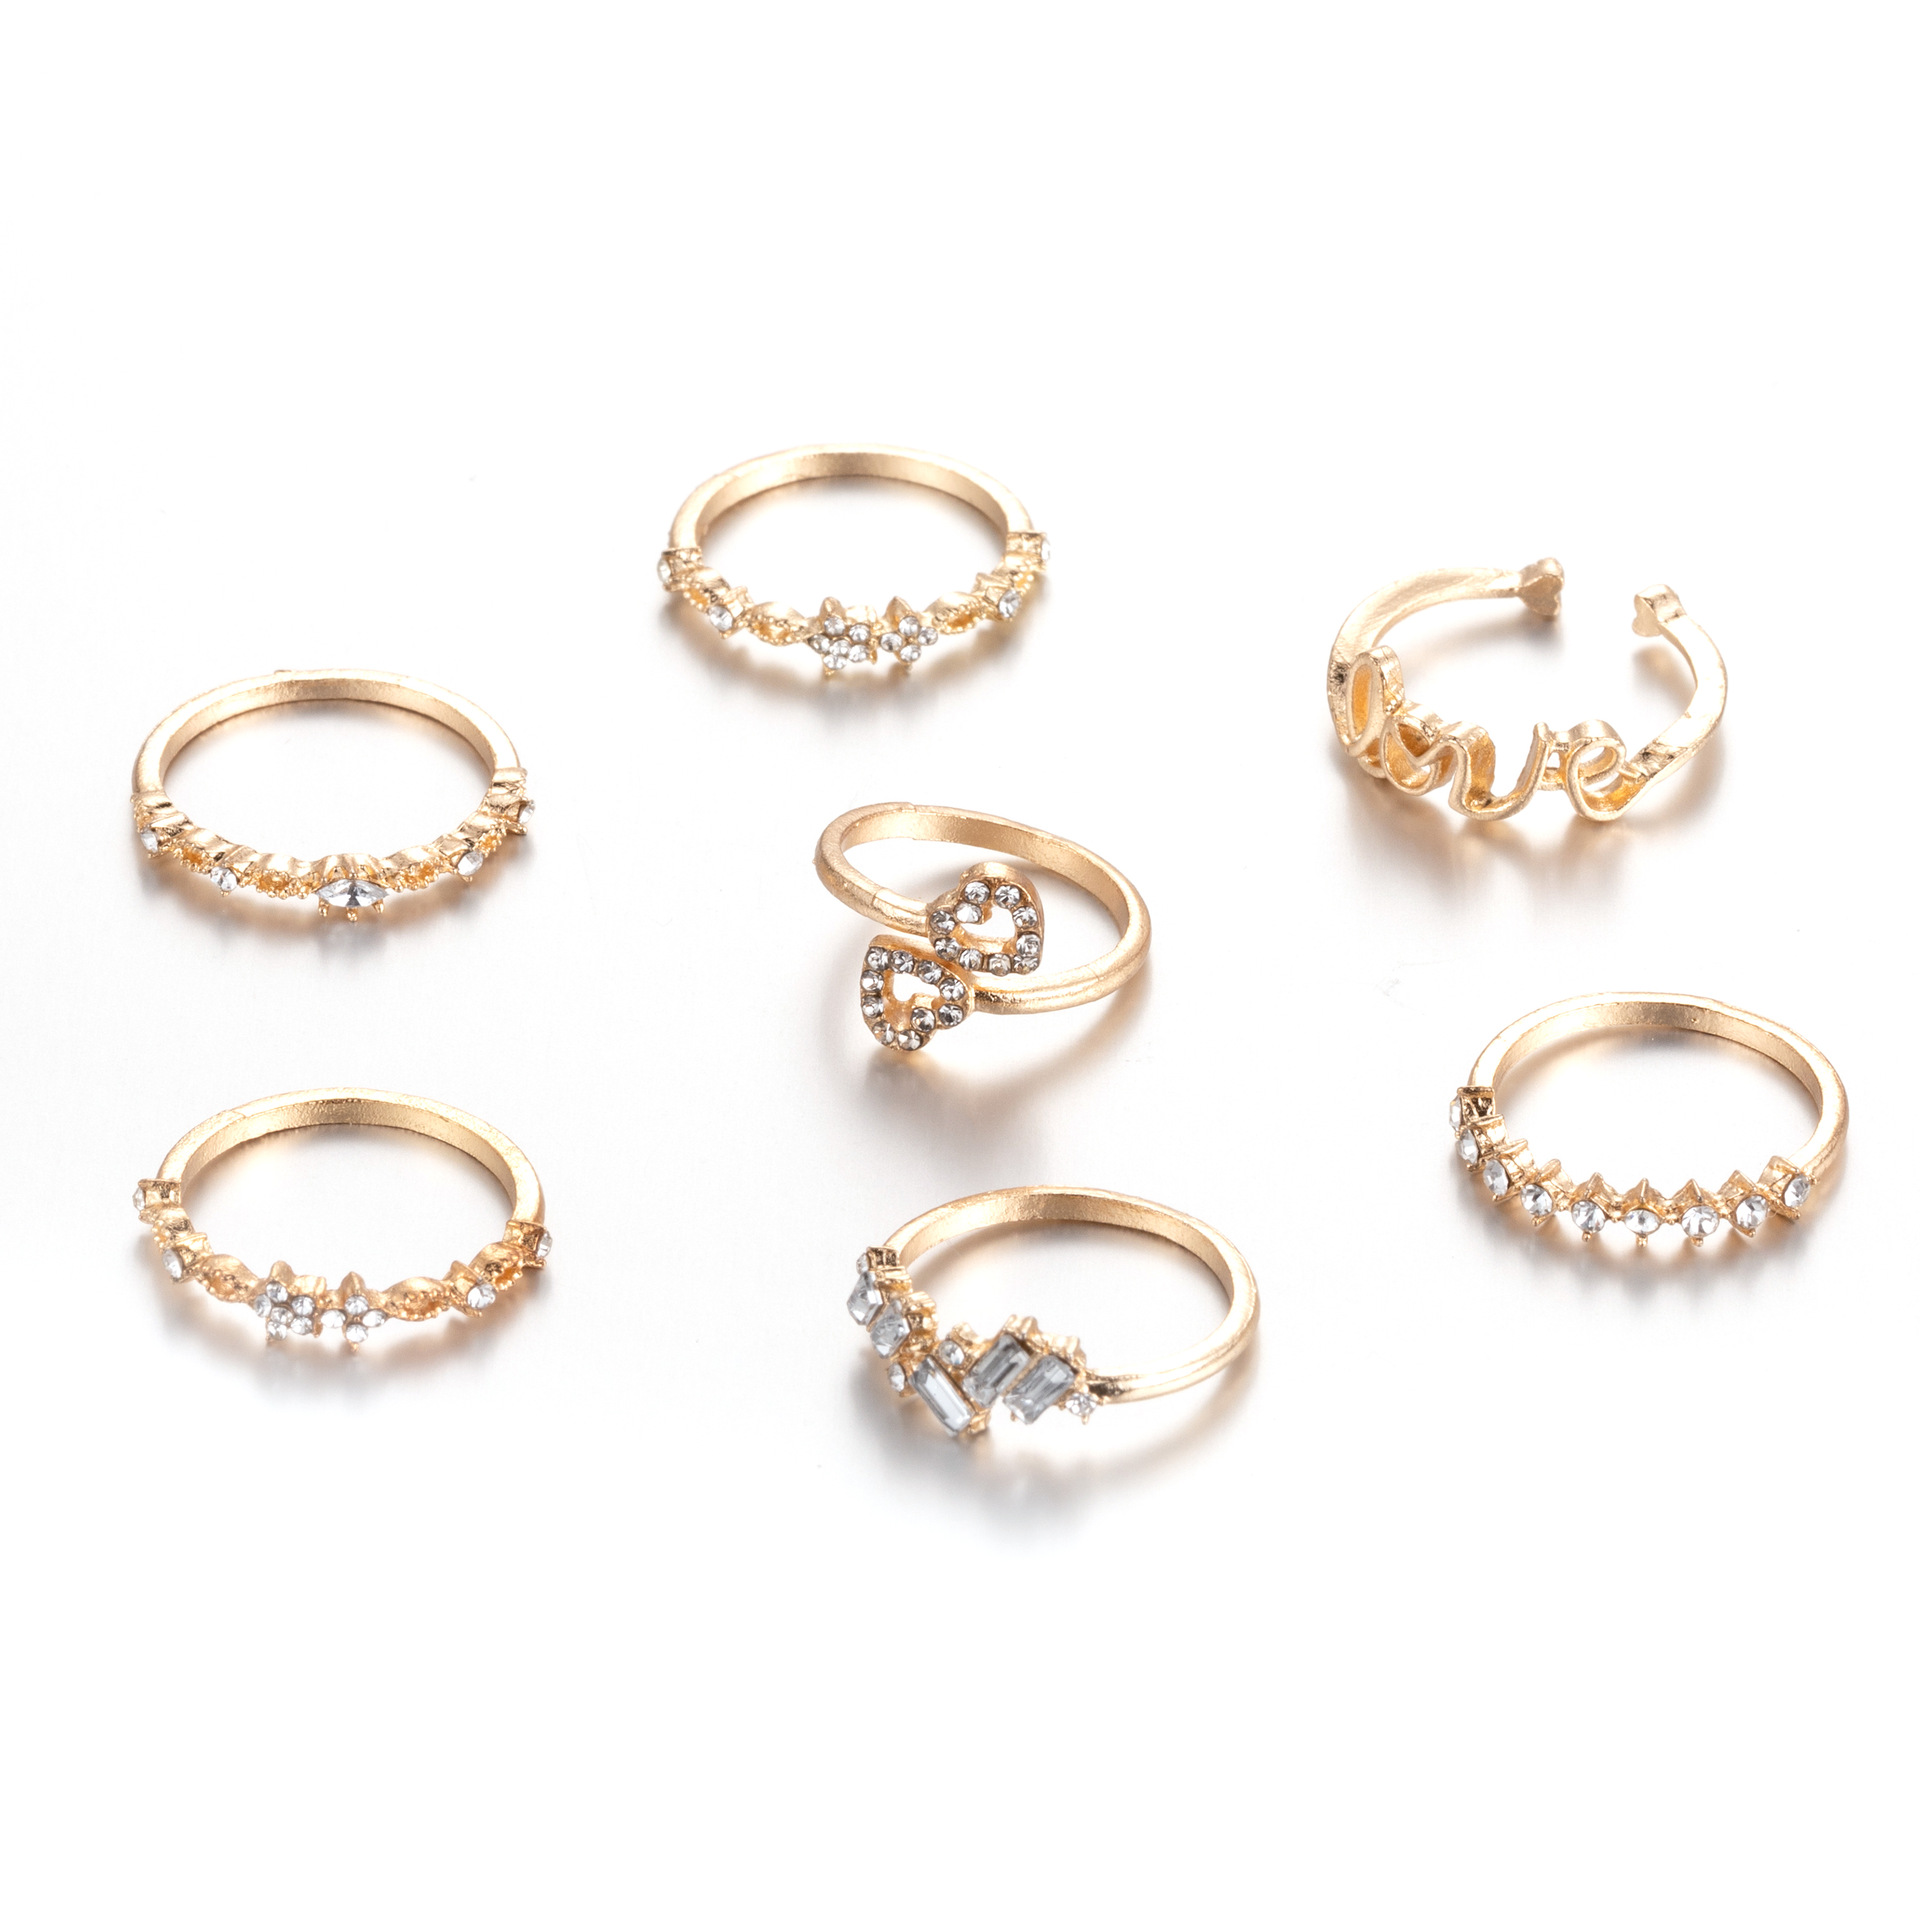 Aliexpress Hot Sale Gold Combined Ring Set European and American Fashion Love Spot Drill 7 Pieces Set Rings Wholesale